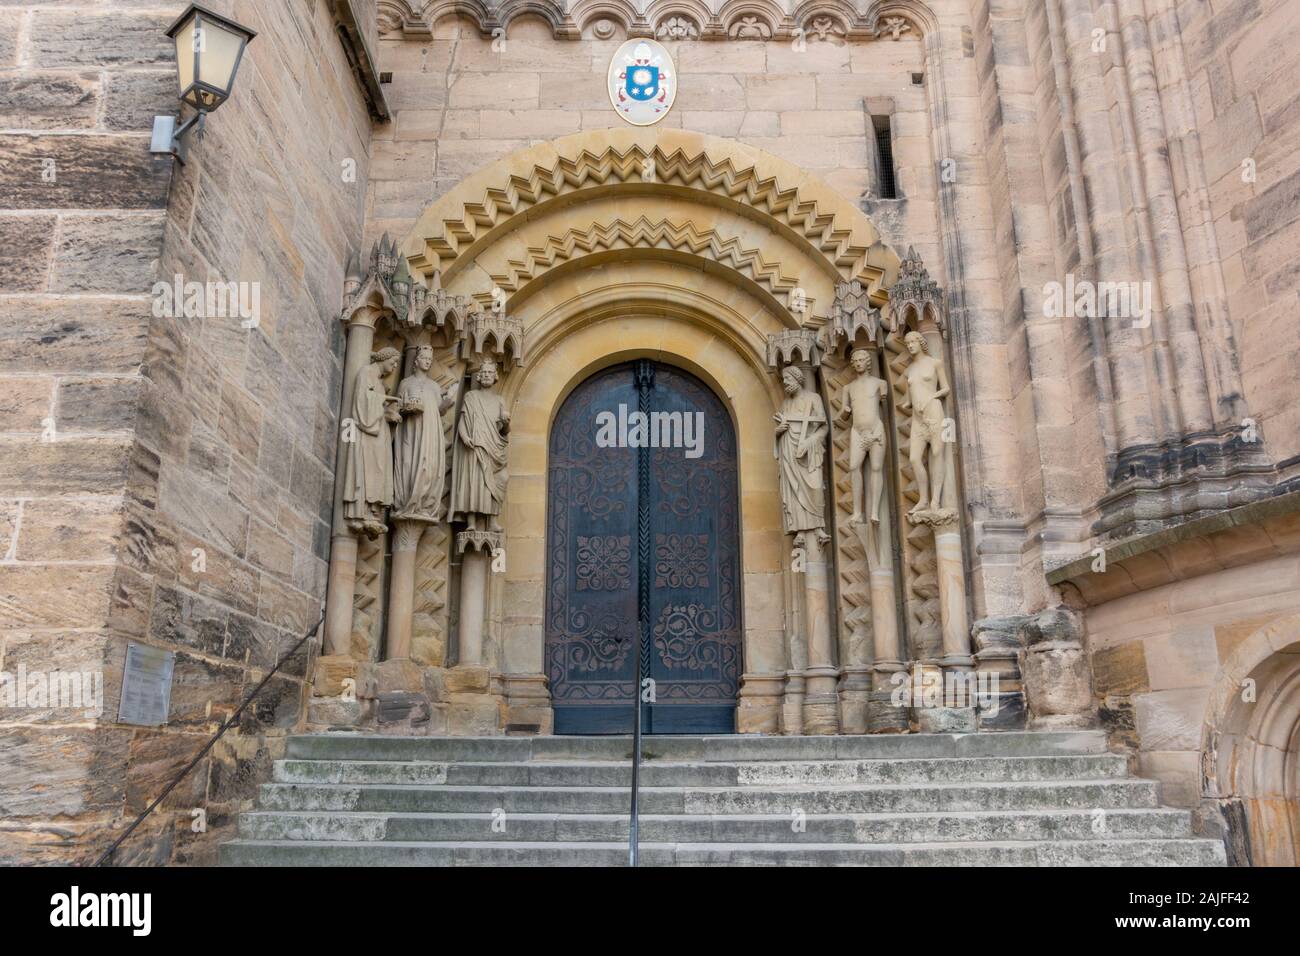 Imposing side doors to Bamberger Dom (Bamberg Cathedral) in Bamberg, Upper Franconia, Germany. Stock Photo